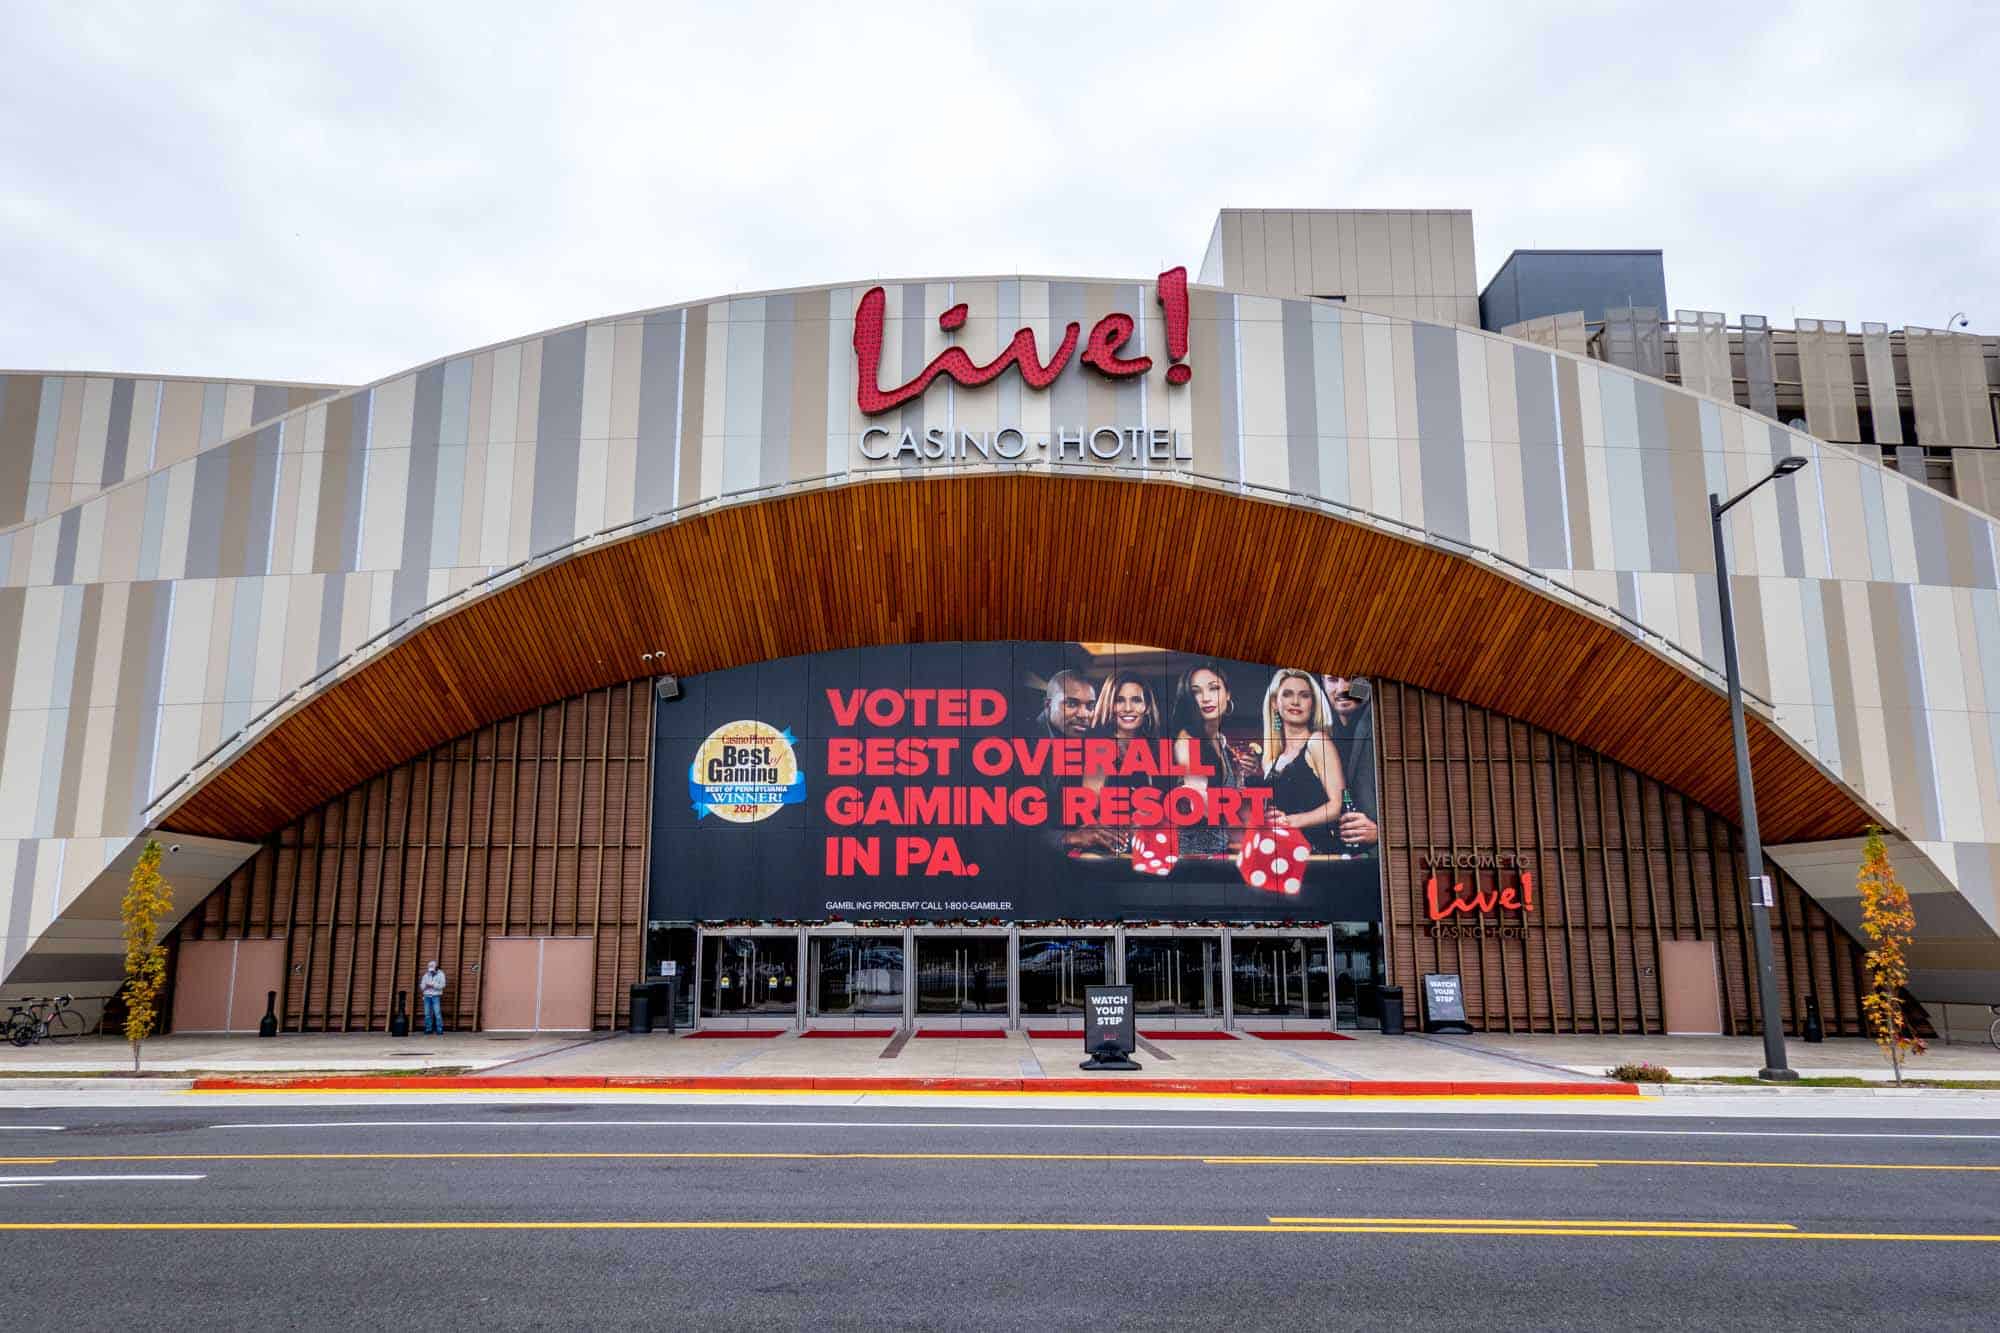 Large building with an arched entryway and a sign for "Live! Casino Hotel" above an advertisement announcing "Voted Best Overall Gaming Resort in PA."